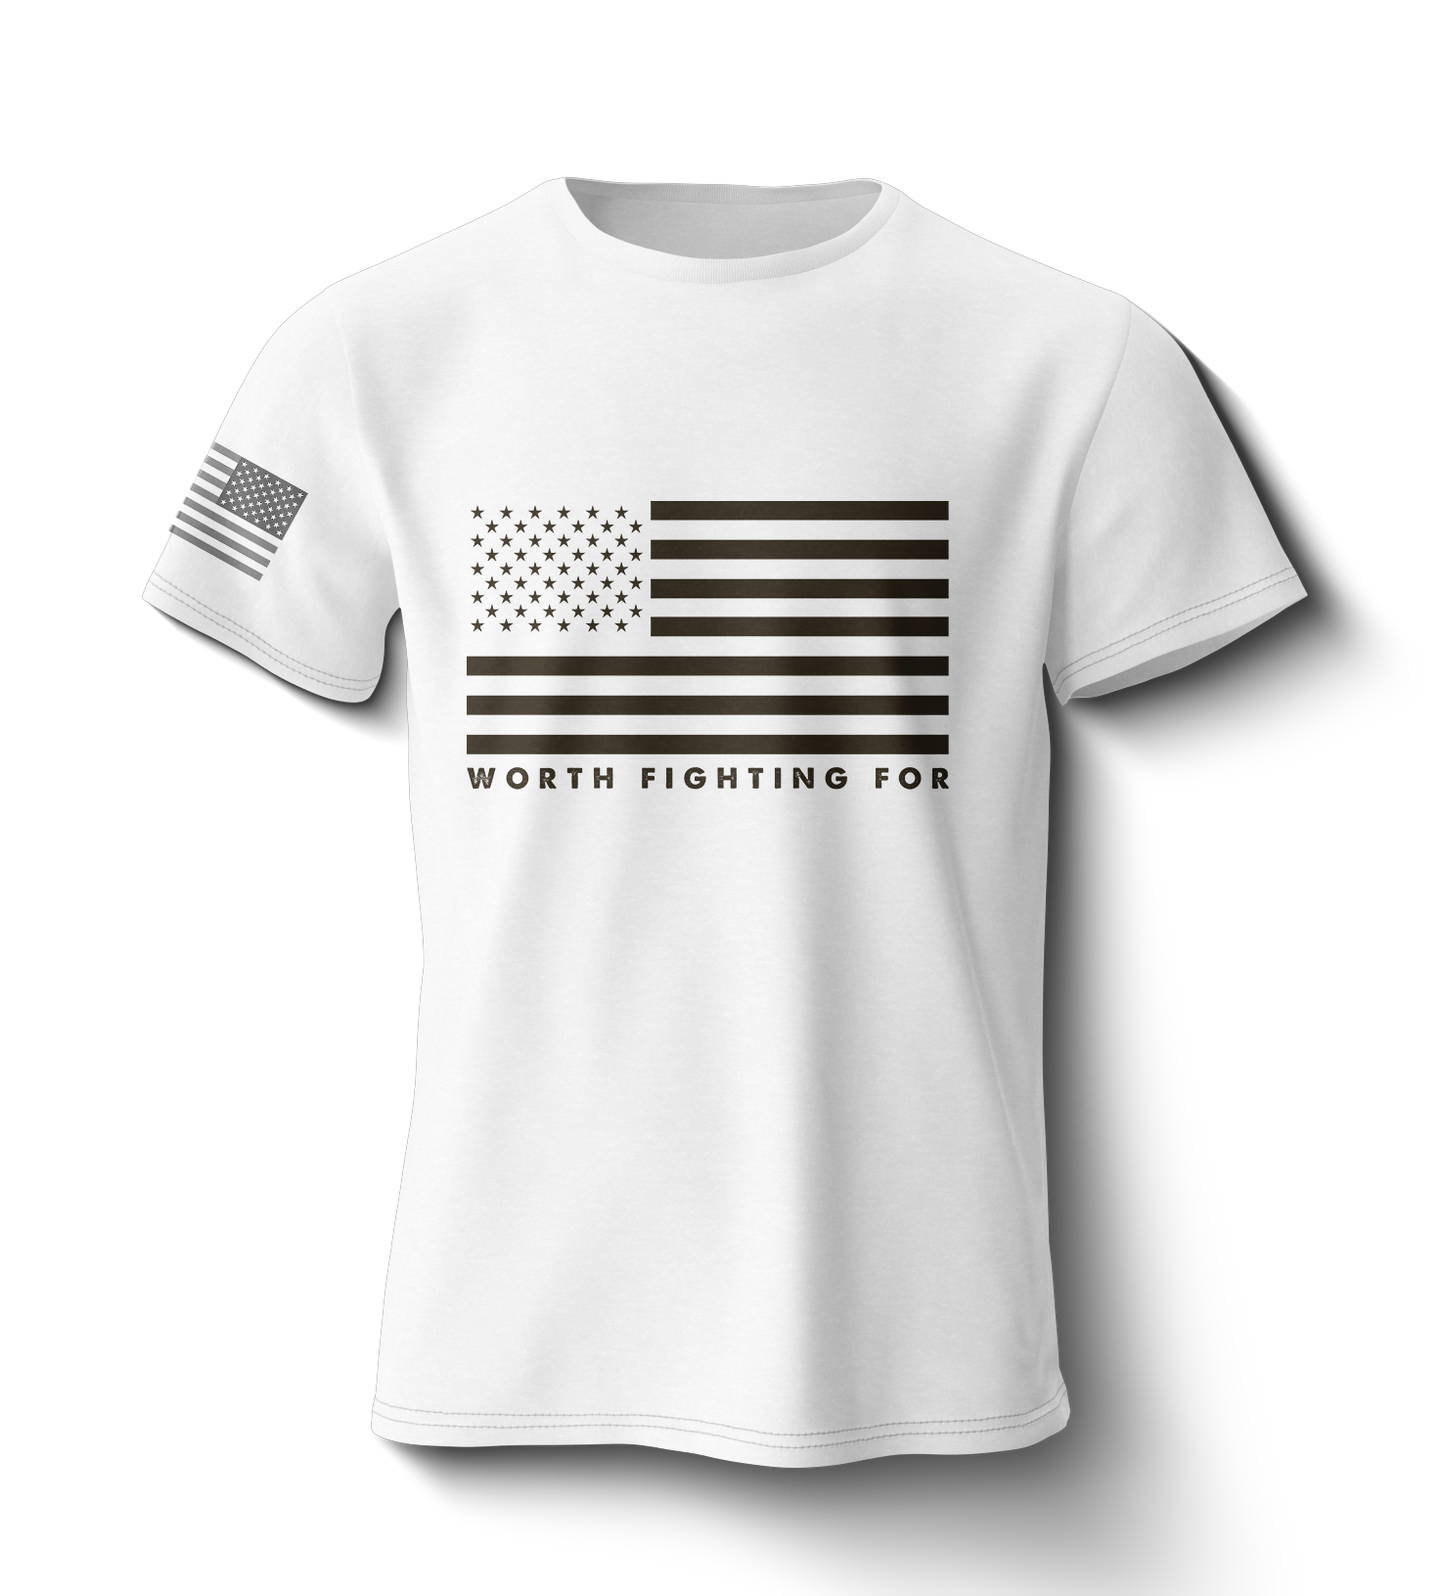 WORTH FIGHTING FOR - Unisex